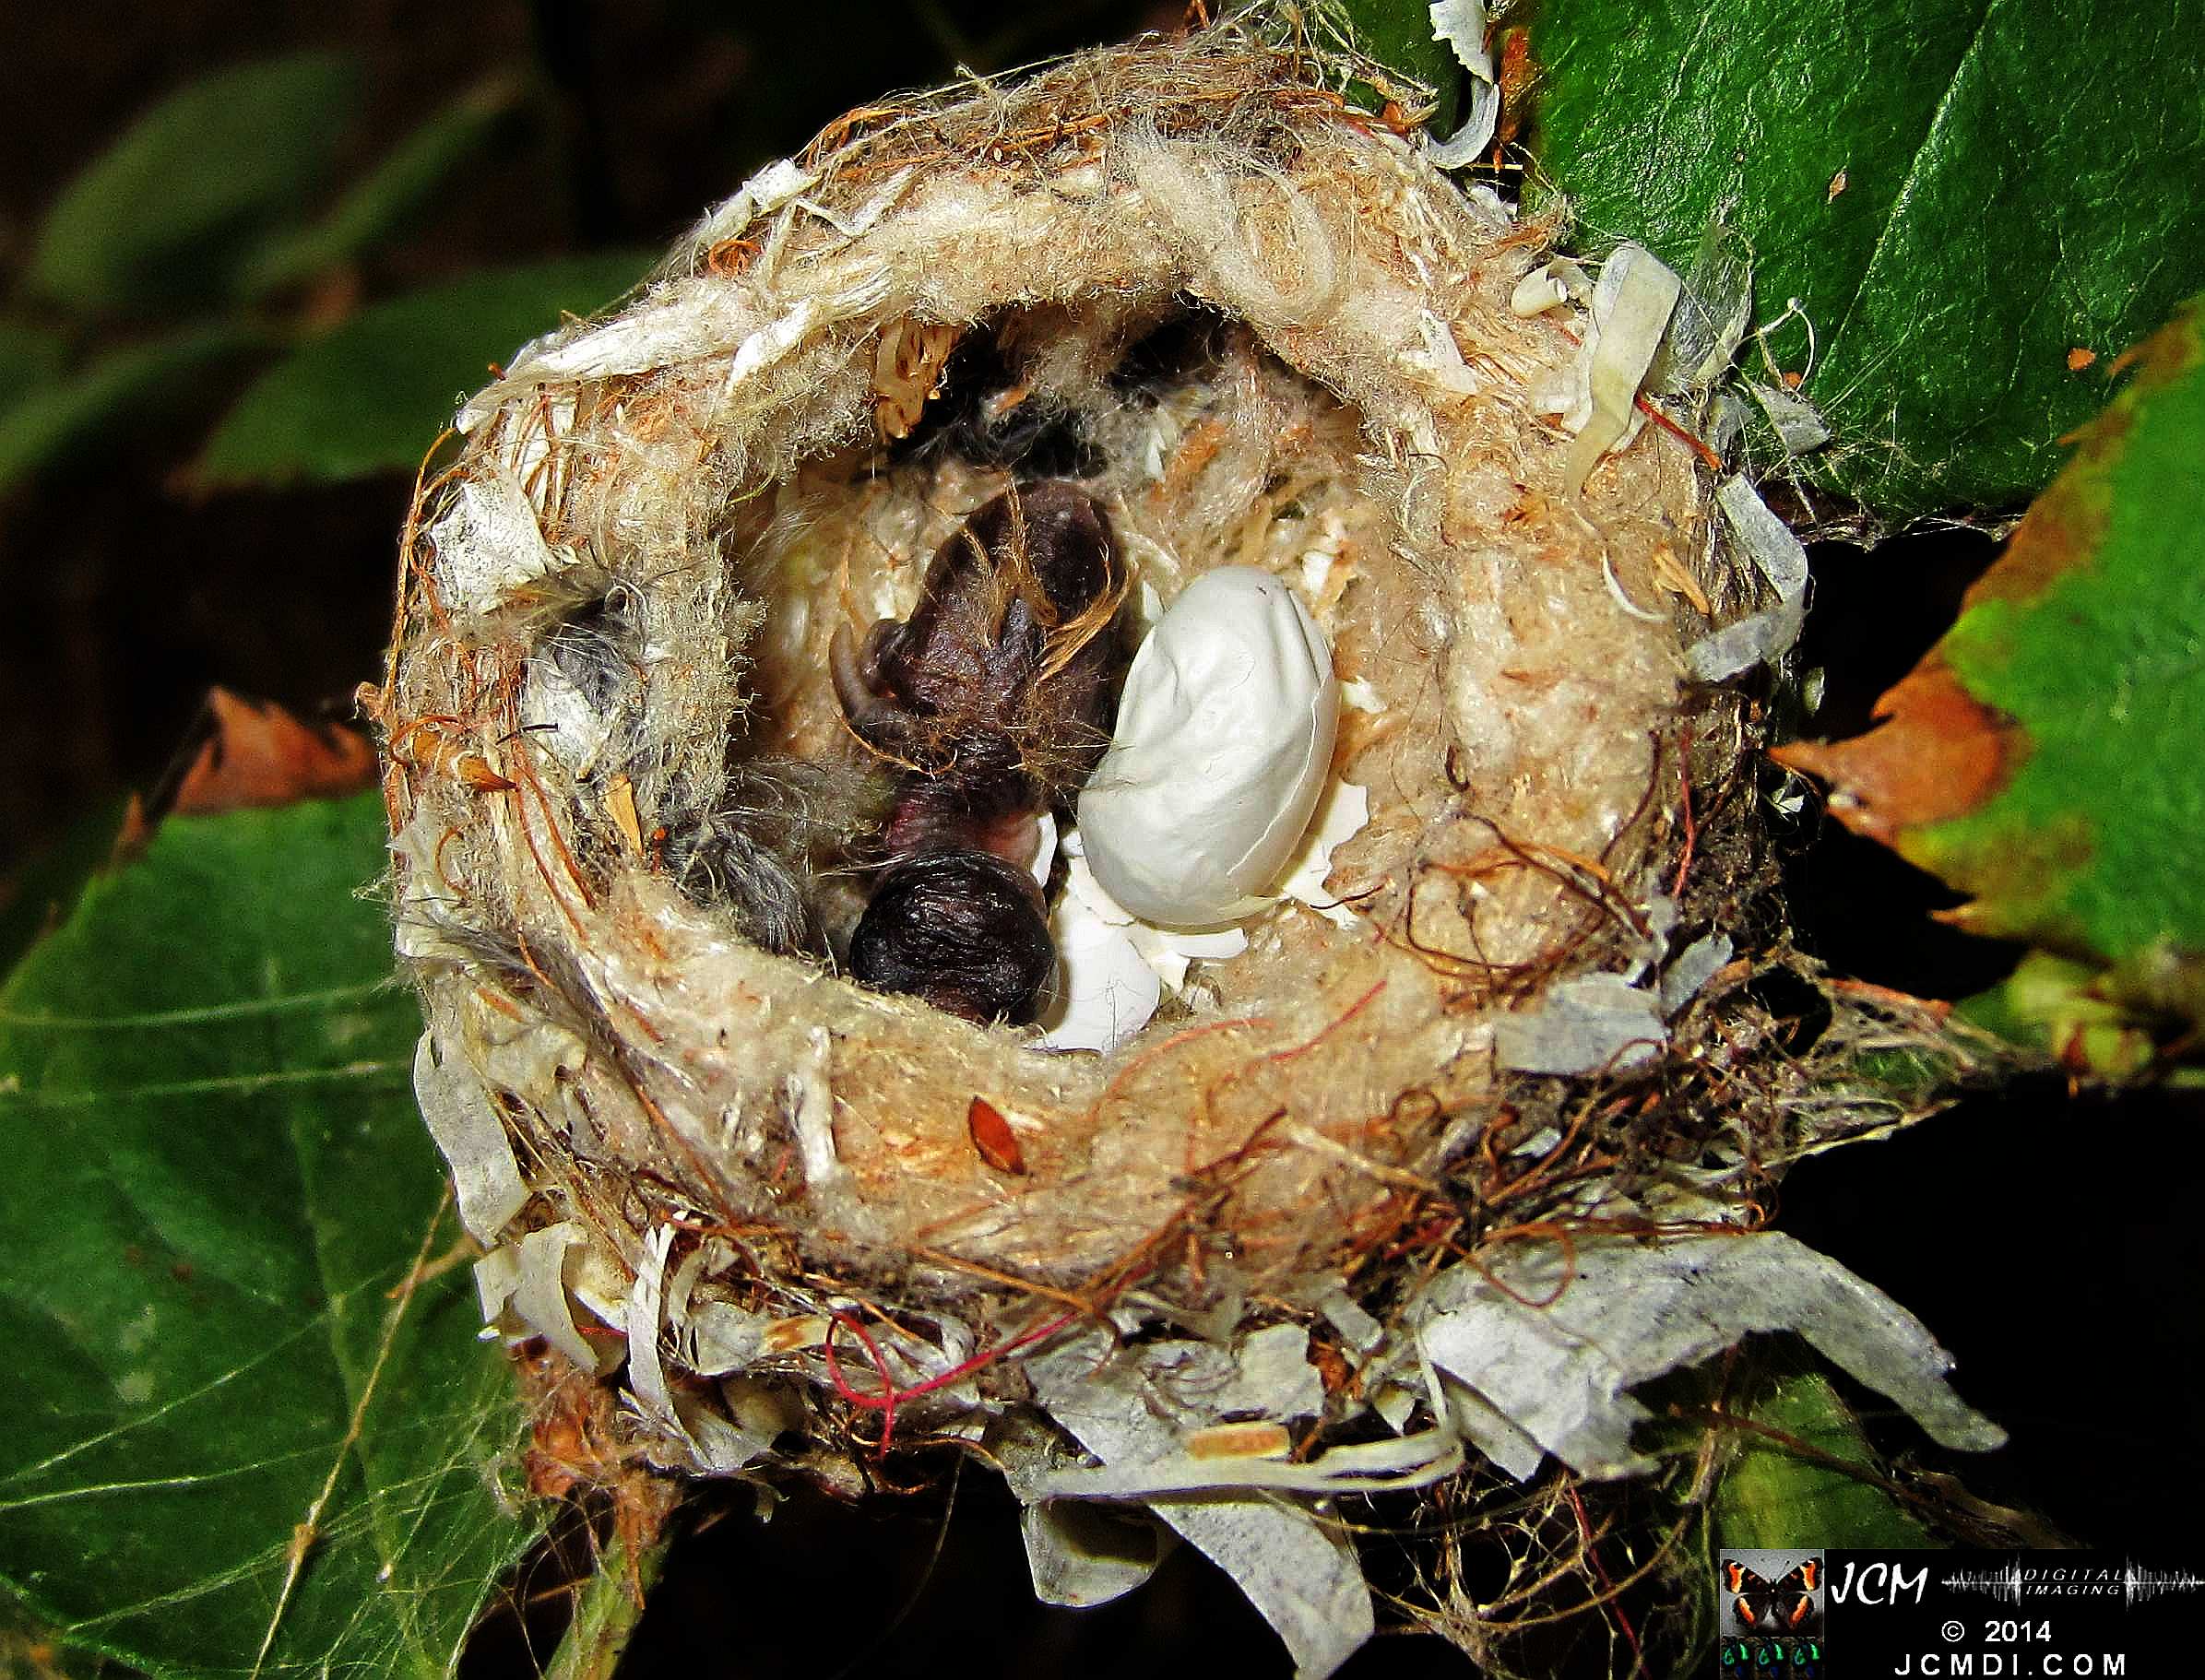 Allens Hummingbird nest with chick and egg